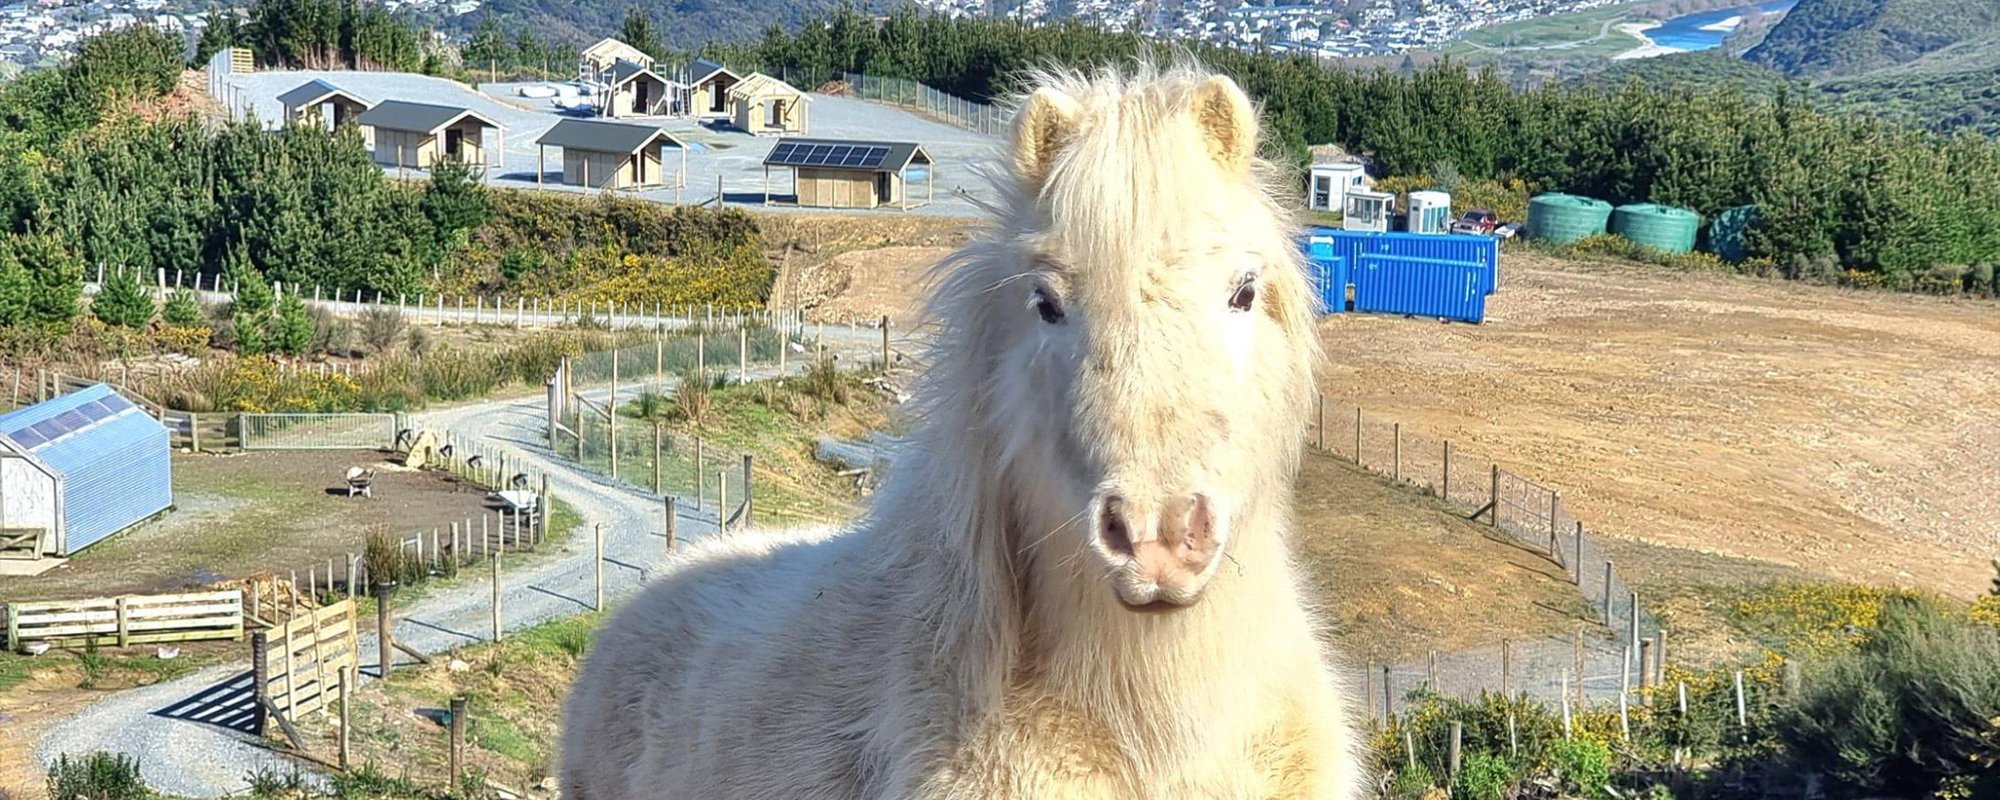 Fluffy white horse staring down the camera on a hill with a farm in the background